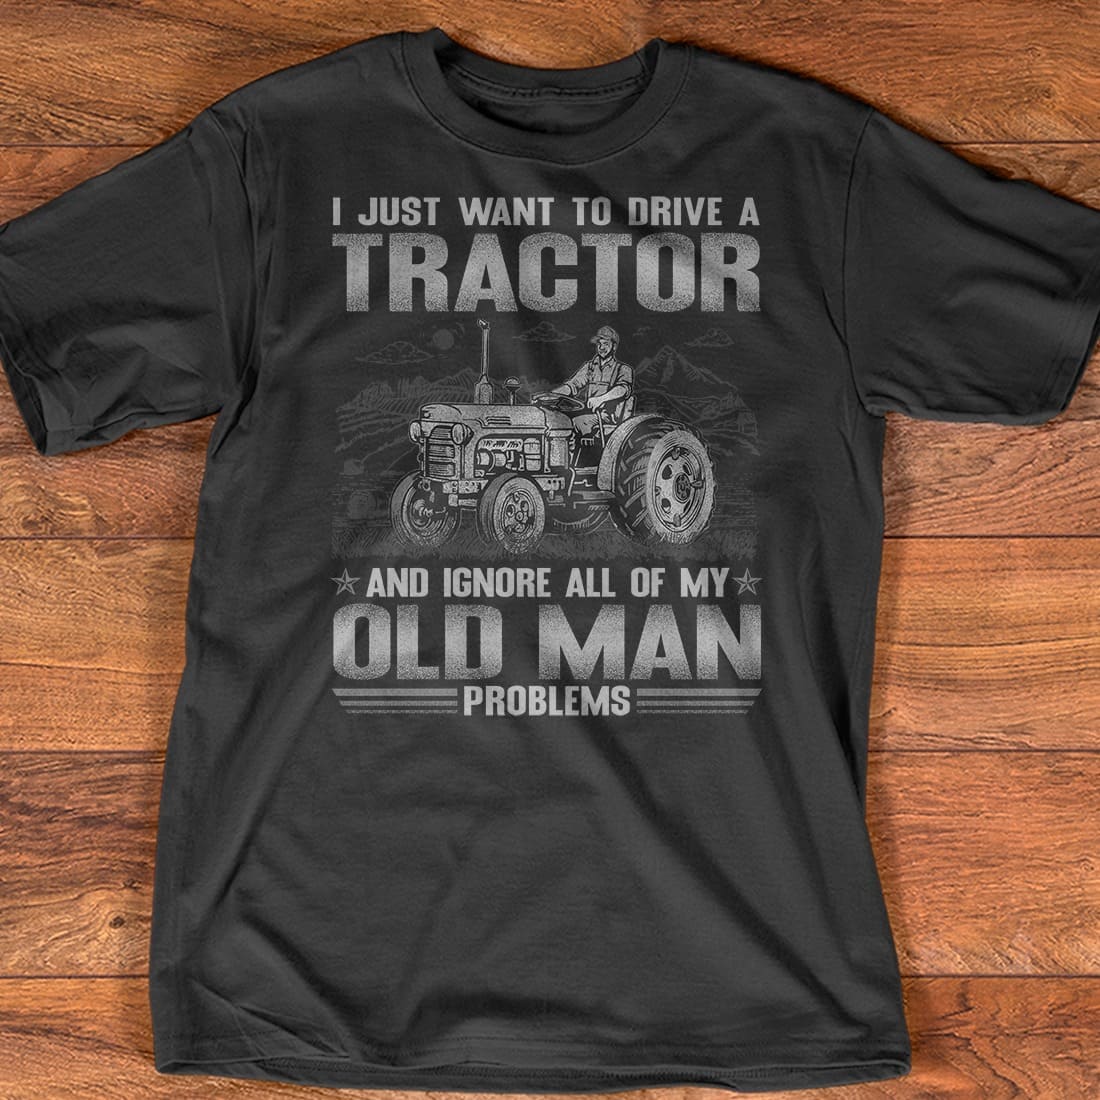 I just want to drive a tractor and ignore all of my old man problems - Tractor driver graphic T-shirt, farmer driving tractor